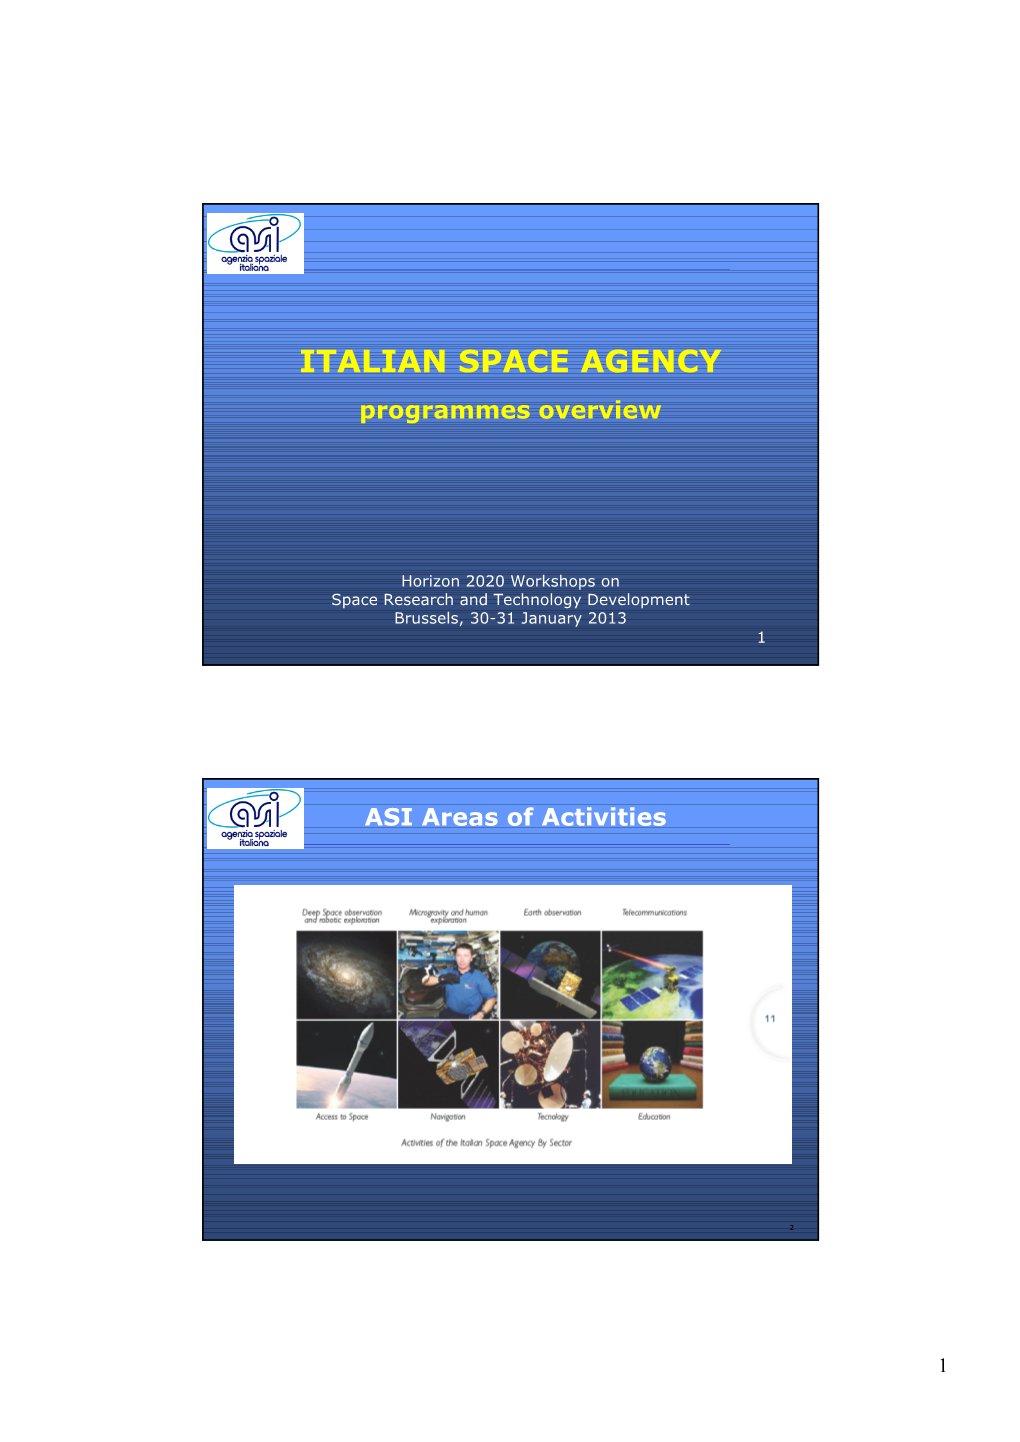 ITALIAN SPACE AGENCY Programmes Overview